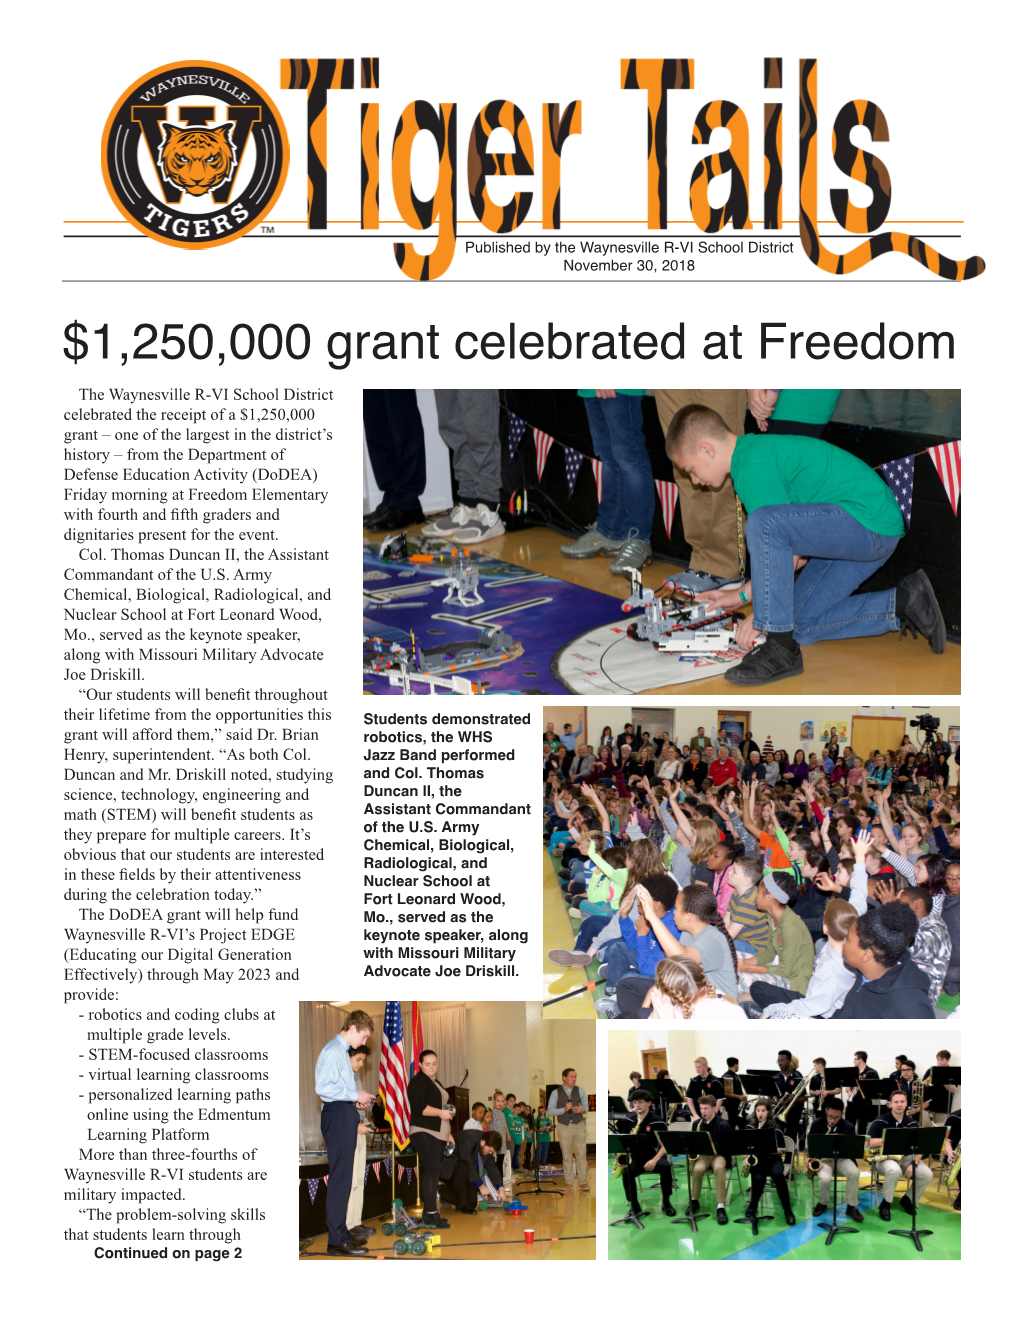 $1,250,000 Grant Celebrated at Freedom